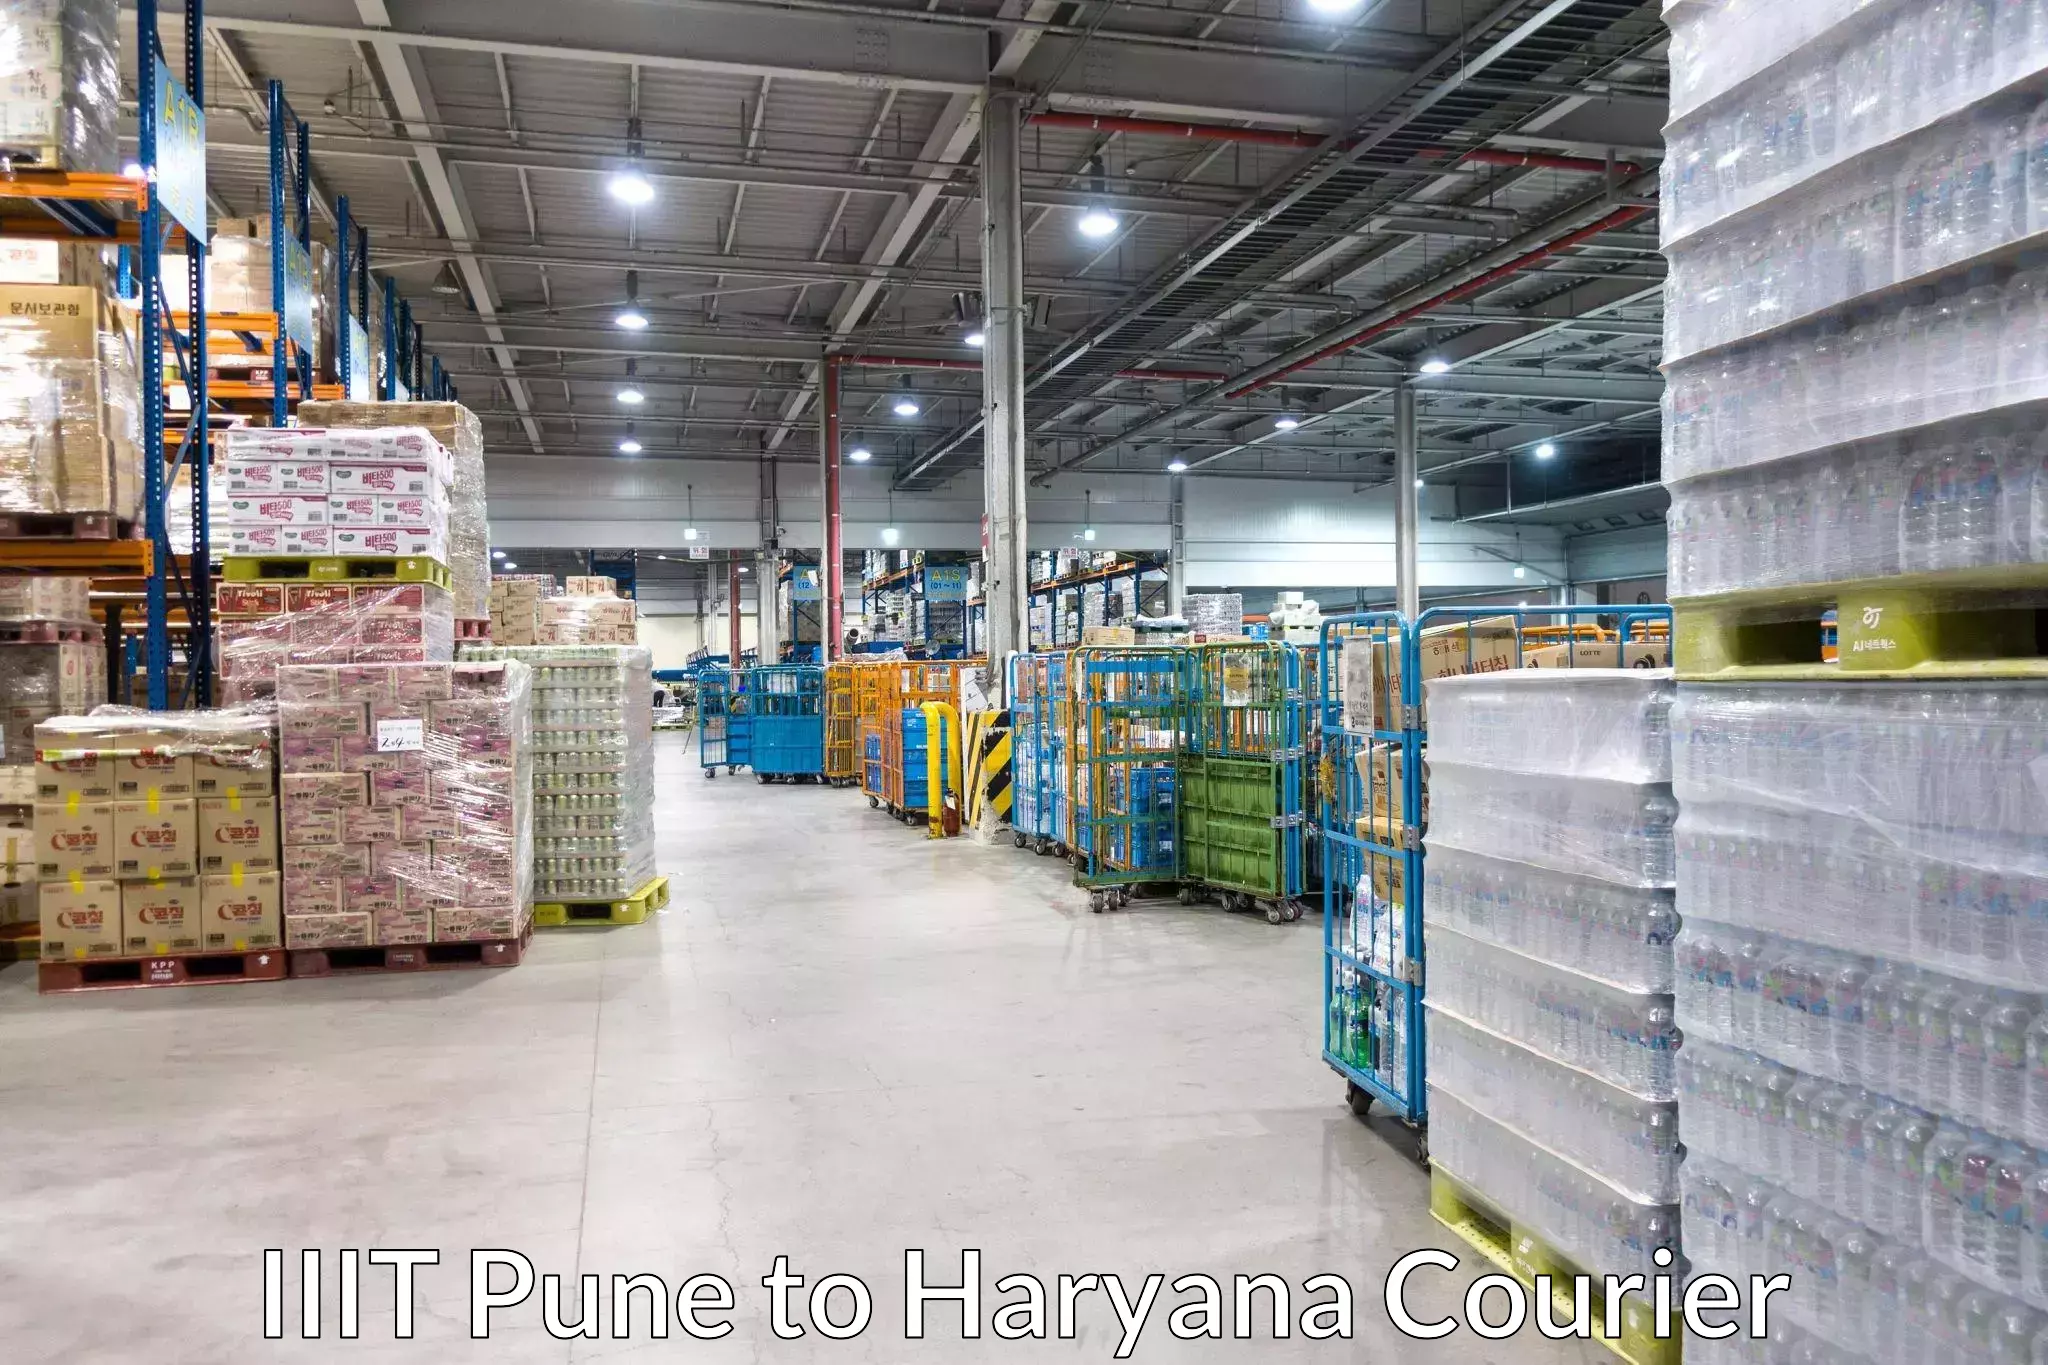 Comprehensive shipping network IIIT Pune to Sonipat